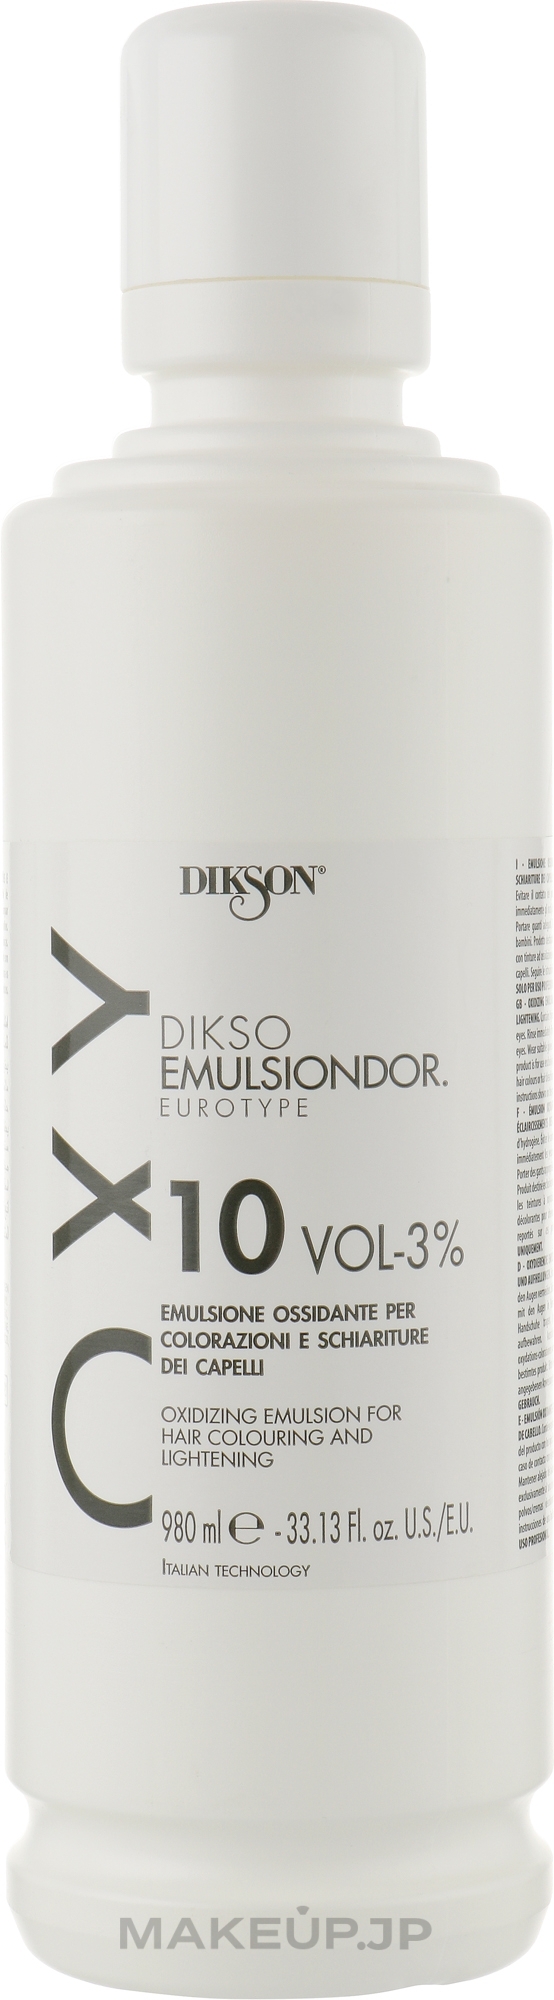 Oxidizing Emulsion - Dikson Oxy Oxidizing Emulsion For Hair Colouring And Lightening 10 Vol-3% — photo 980 ml